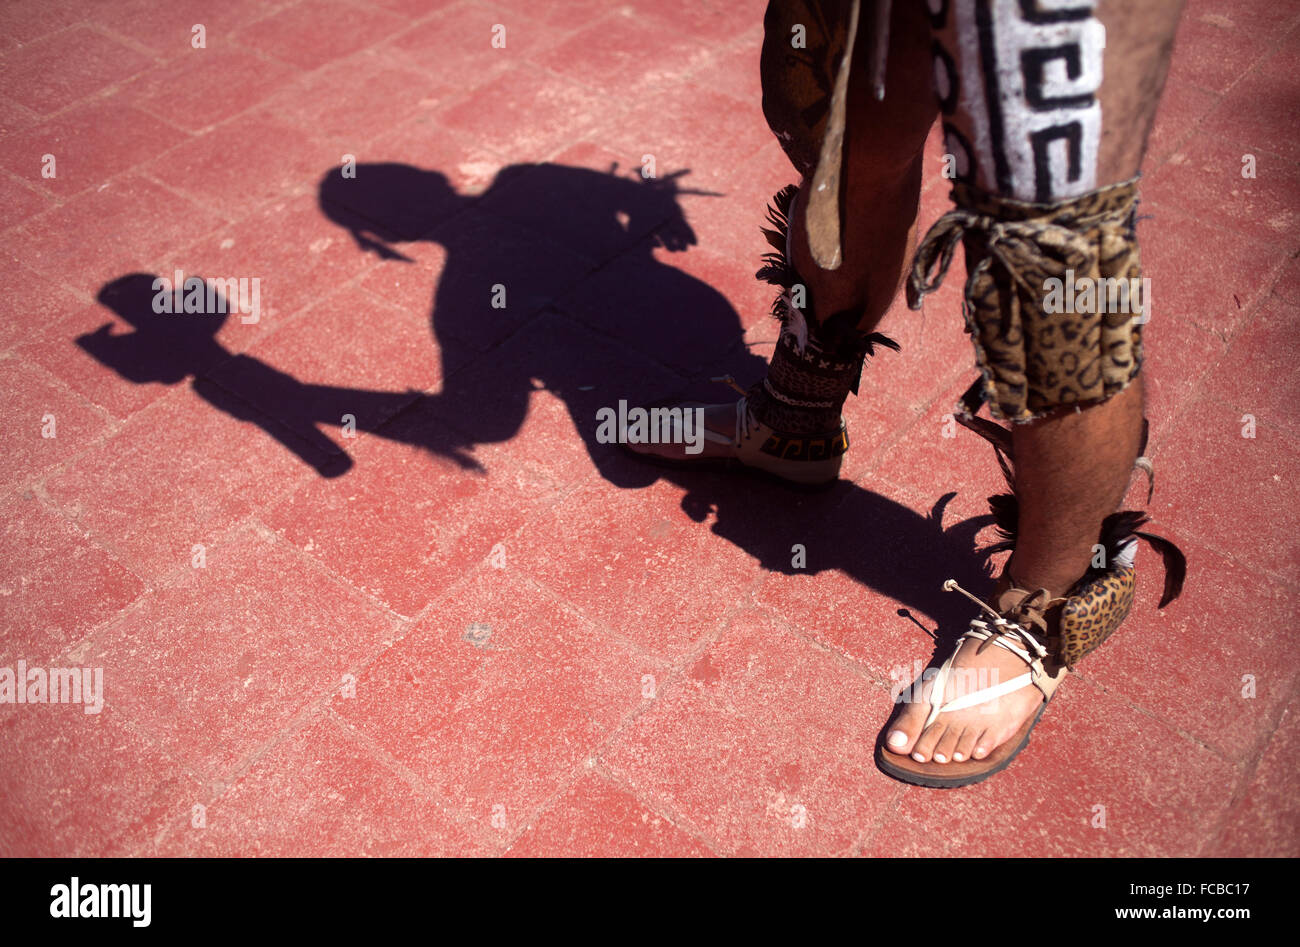 A Mayan Ball Player holds a torch during the first ®Pok Ta Pok® World Cup in Piste, Tinum, Yucatan, Mexico Stock Photo